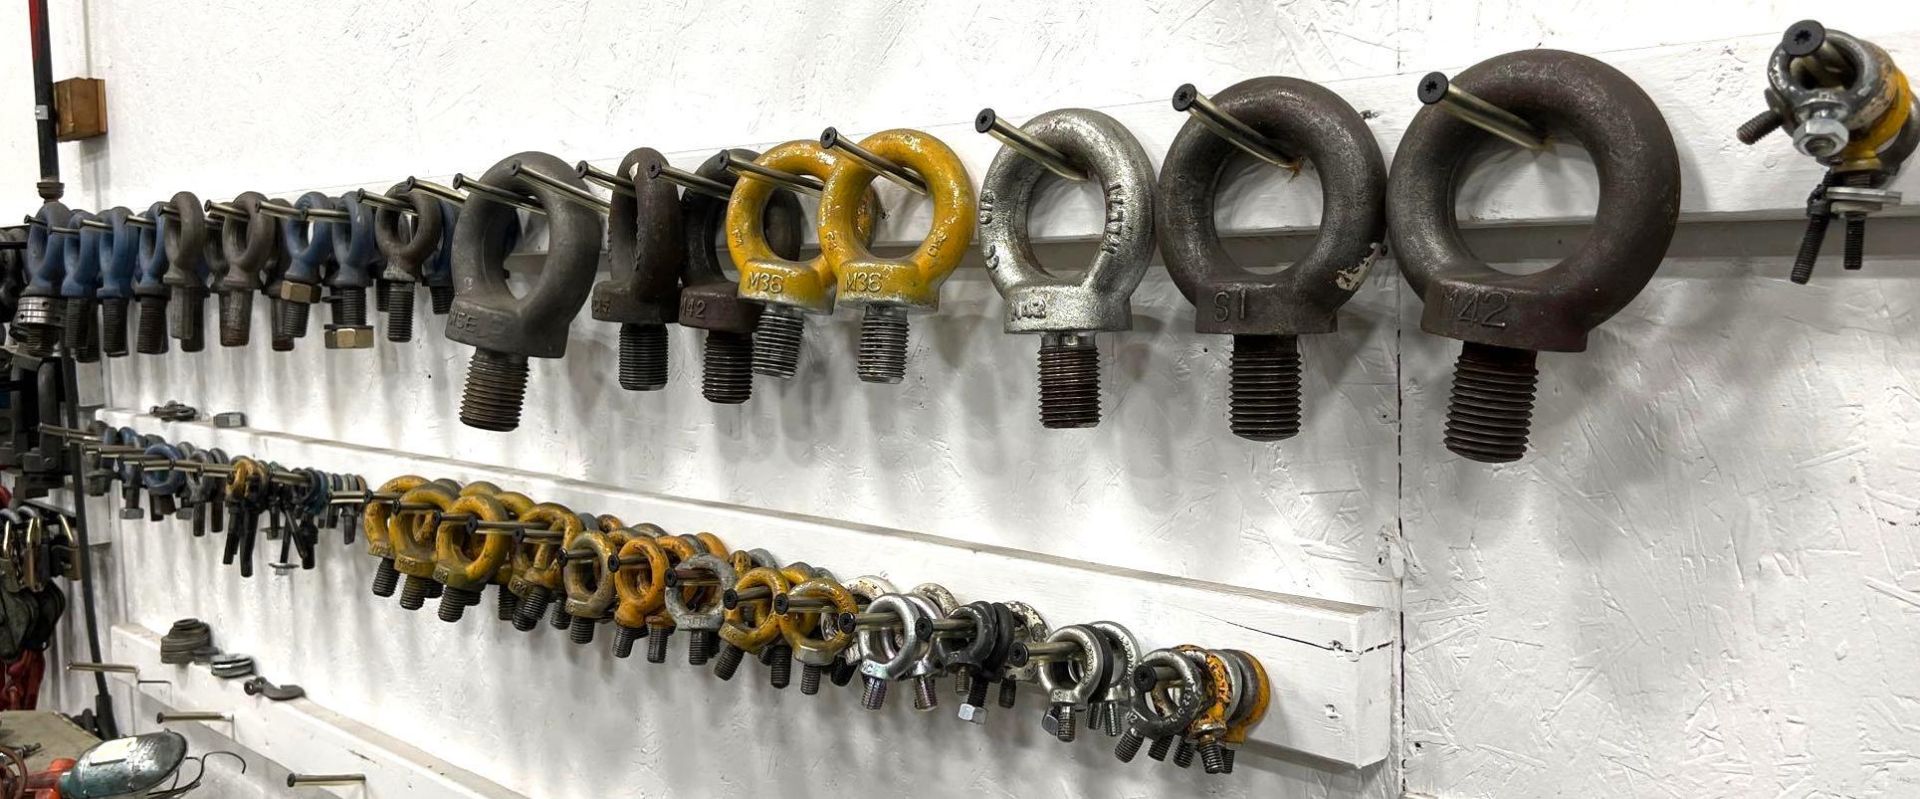 Lot of Assorted Eye Bolts, VariouSizes, Hanging on Wall - Image 3 of 5